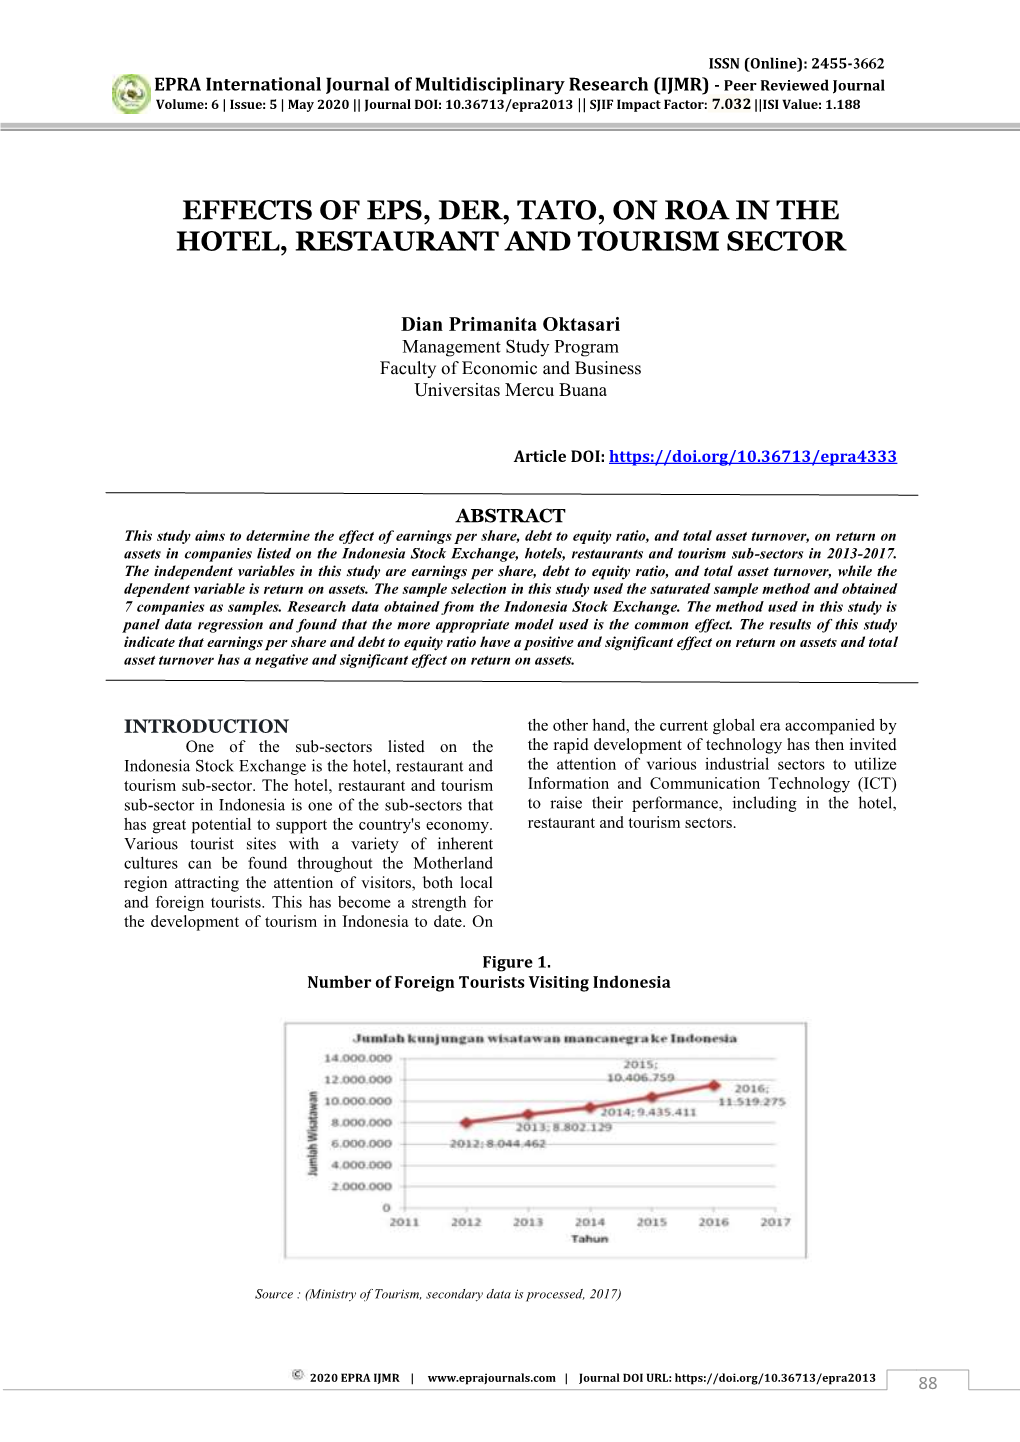 Effects of Eps, Der, Tato, on Roa in the Hotel, Restaurant and Tourism Sector